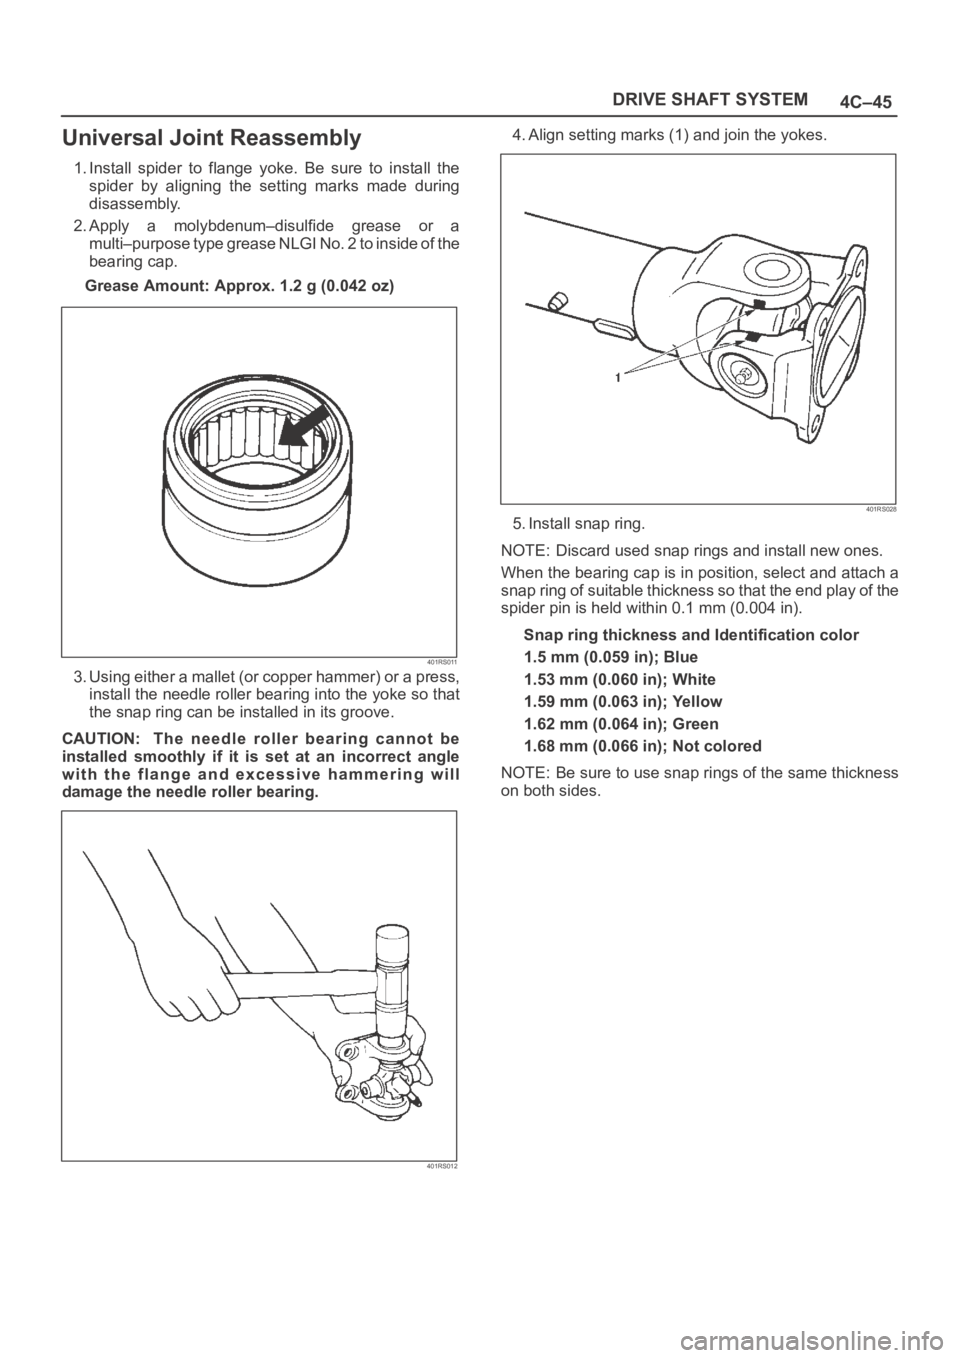 OPEL FRONTERA 1998  Workshop Manual 4C–45 DRIVE SHAFT SYSTEM
Universal Joint Reassembly
1. Install  spider  to  flange  yoke.  Be  sure  to  install  the
spider  by  aligning  the  setting  marks  made  during
disassembly.
2. Apply  a